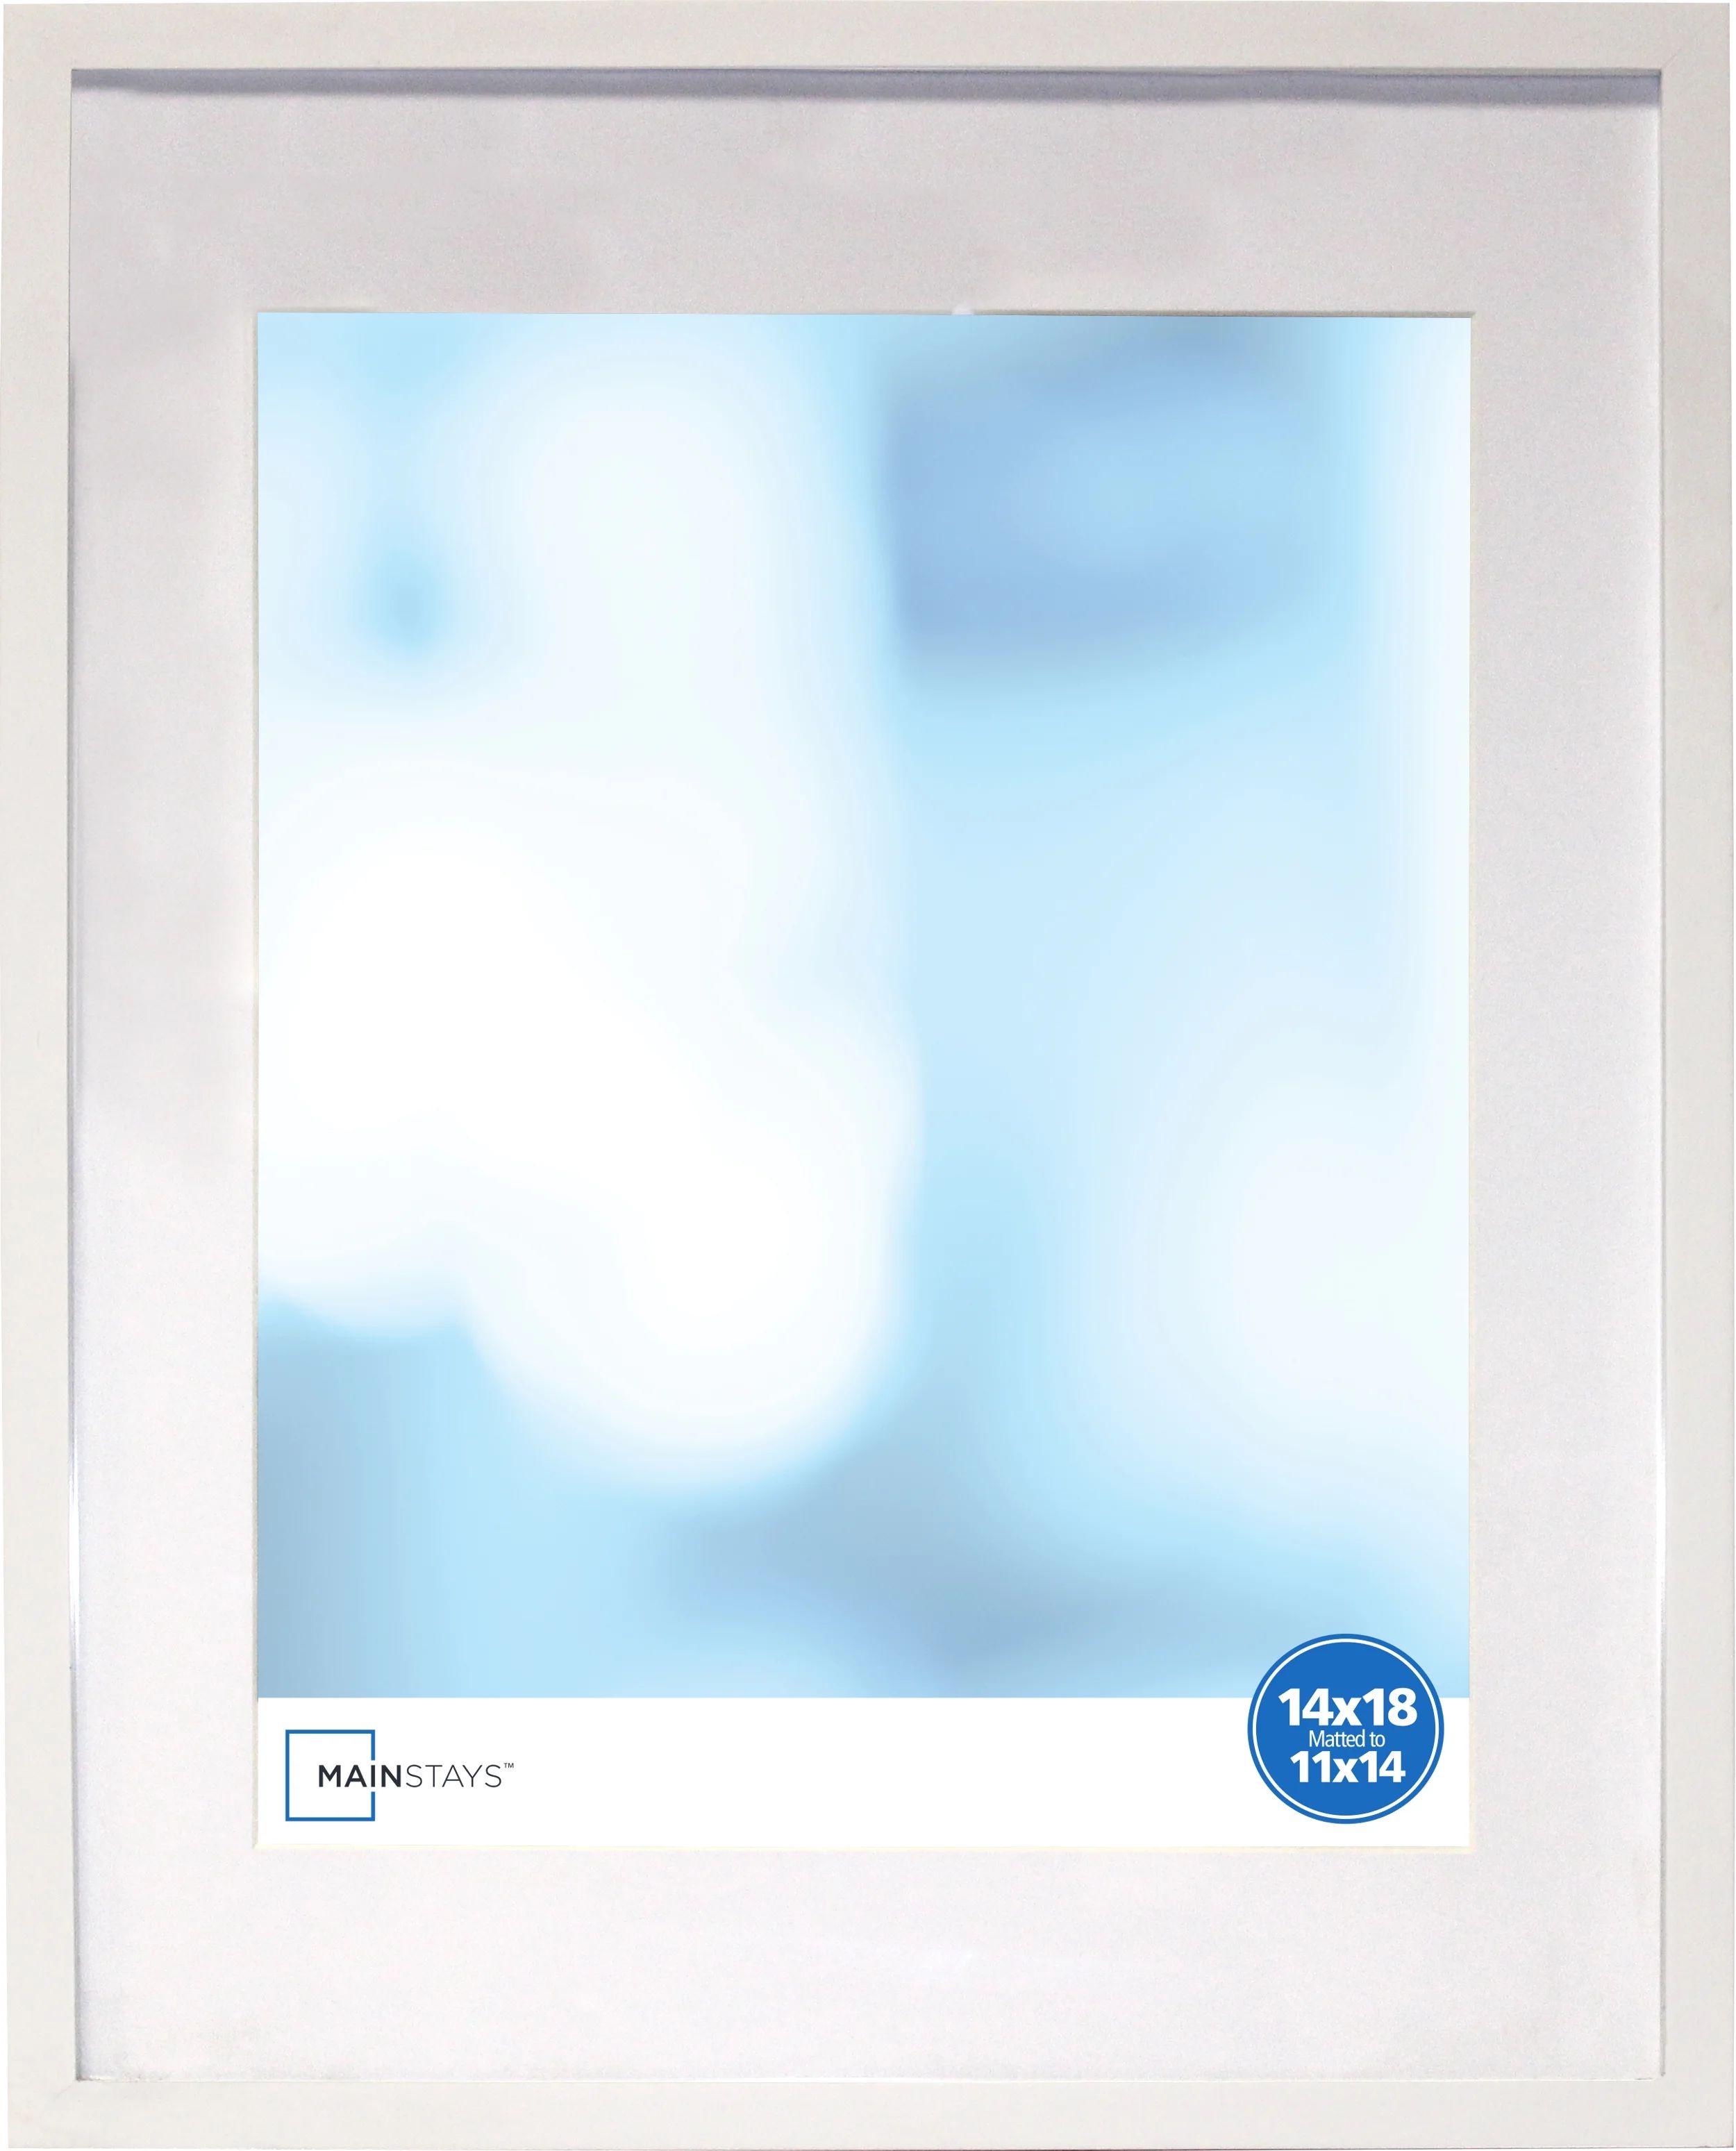 Mainstays14x18 Matted To 11x14 Linear White Frame | Walmart (US)